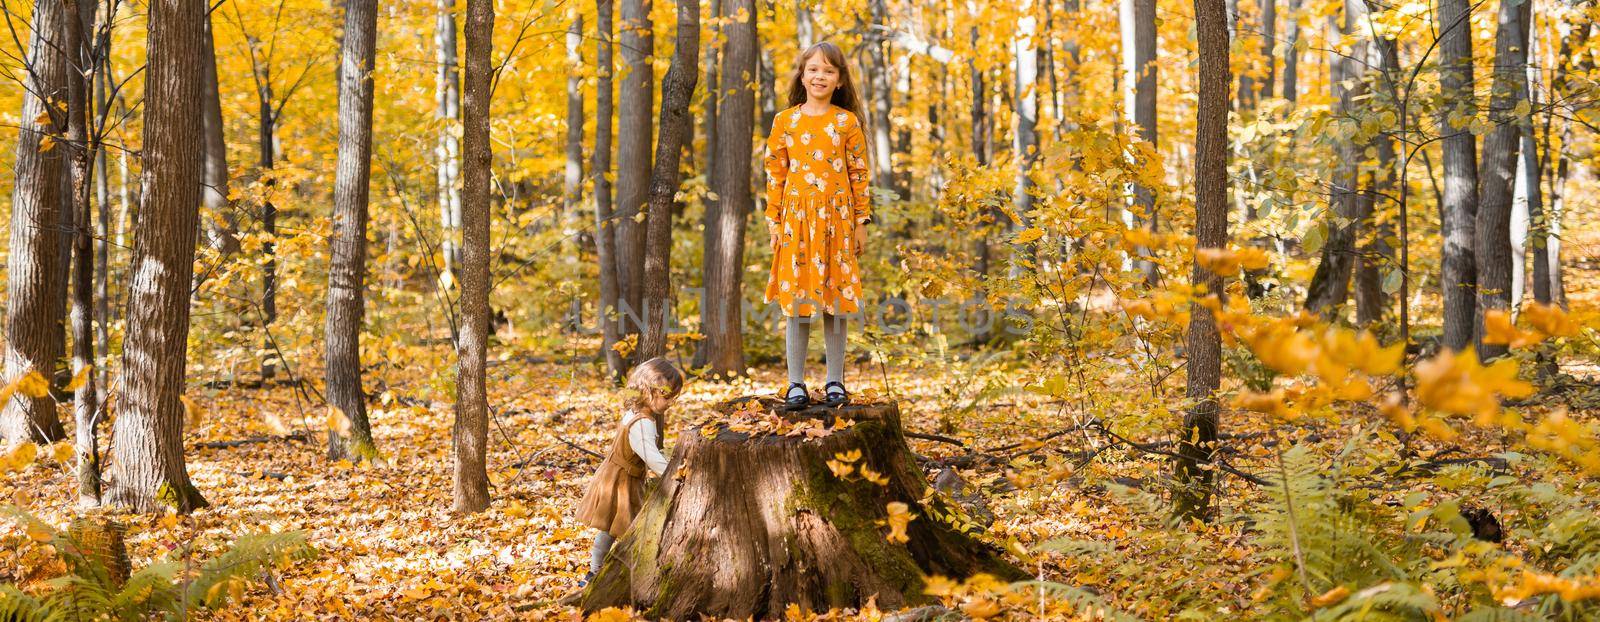 Banner little kid girls with autumn orange leaves in a park copy space. Lifestyle, fall season and children concept. by Satura86